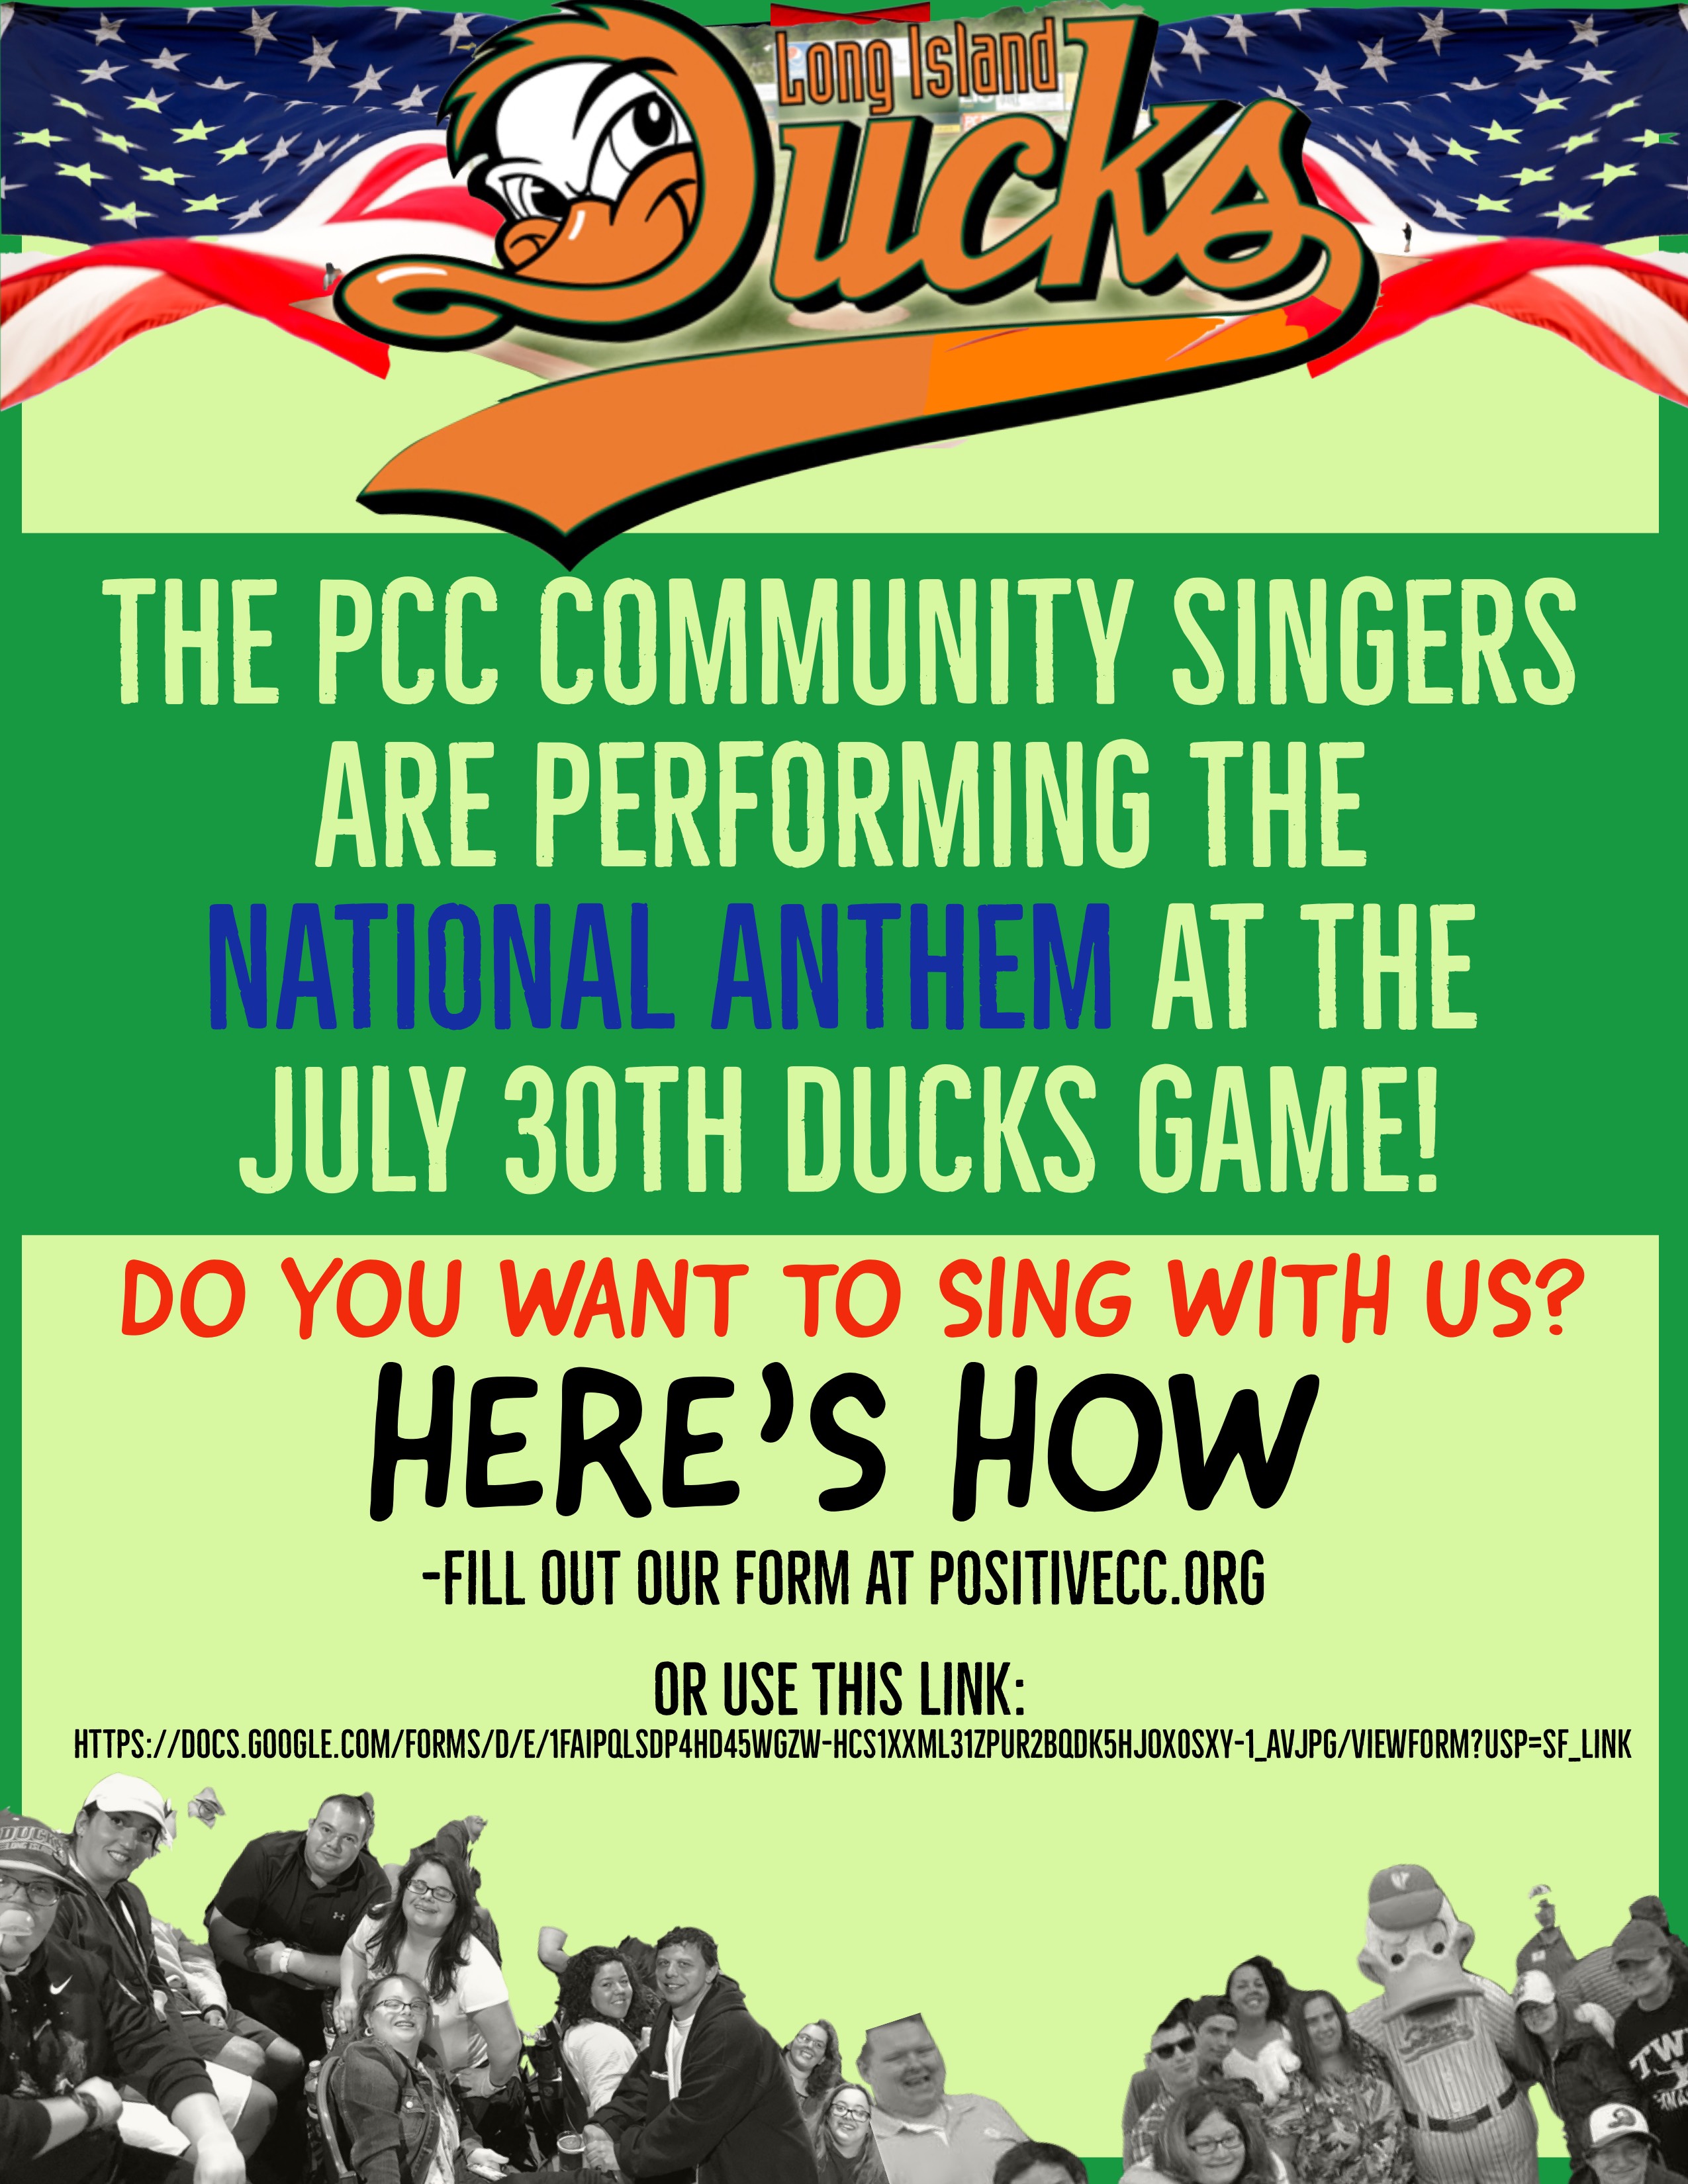 Long Island Ducks Game Positive Community Connections